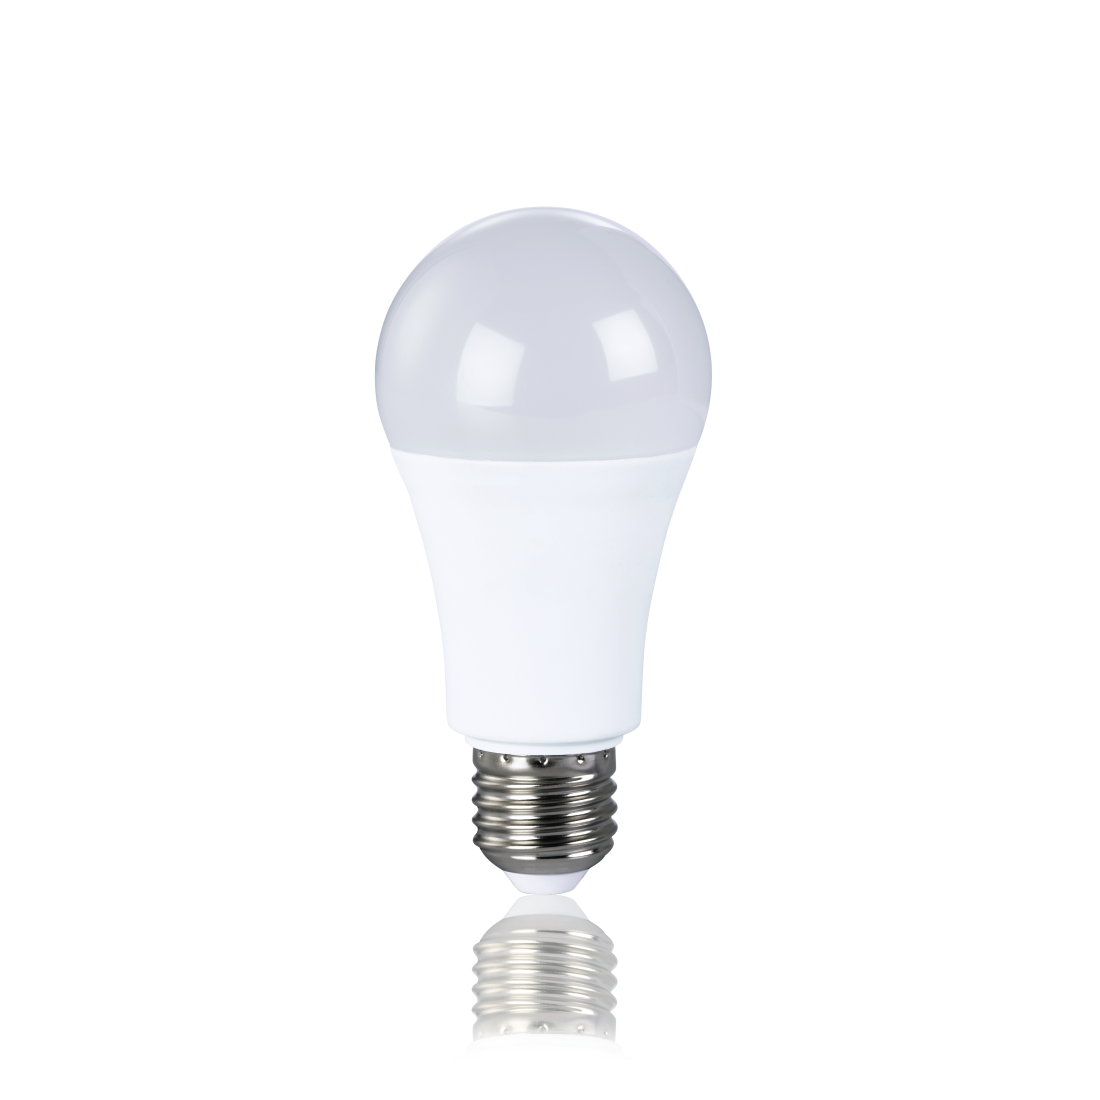 abx2 High-Res Image 2 - Xavax, LED Bulb, E27, 800lm replaces 60W, incandescent bulb, warm white/daylight